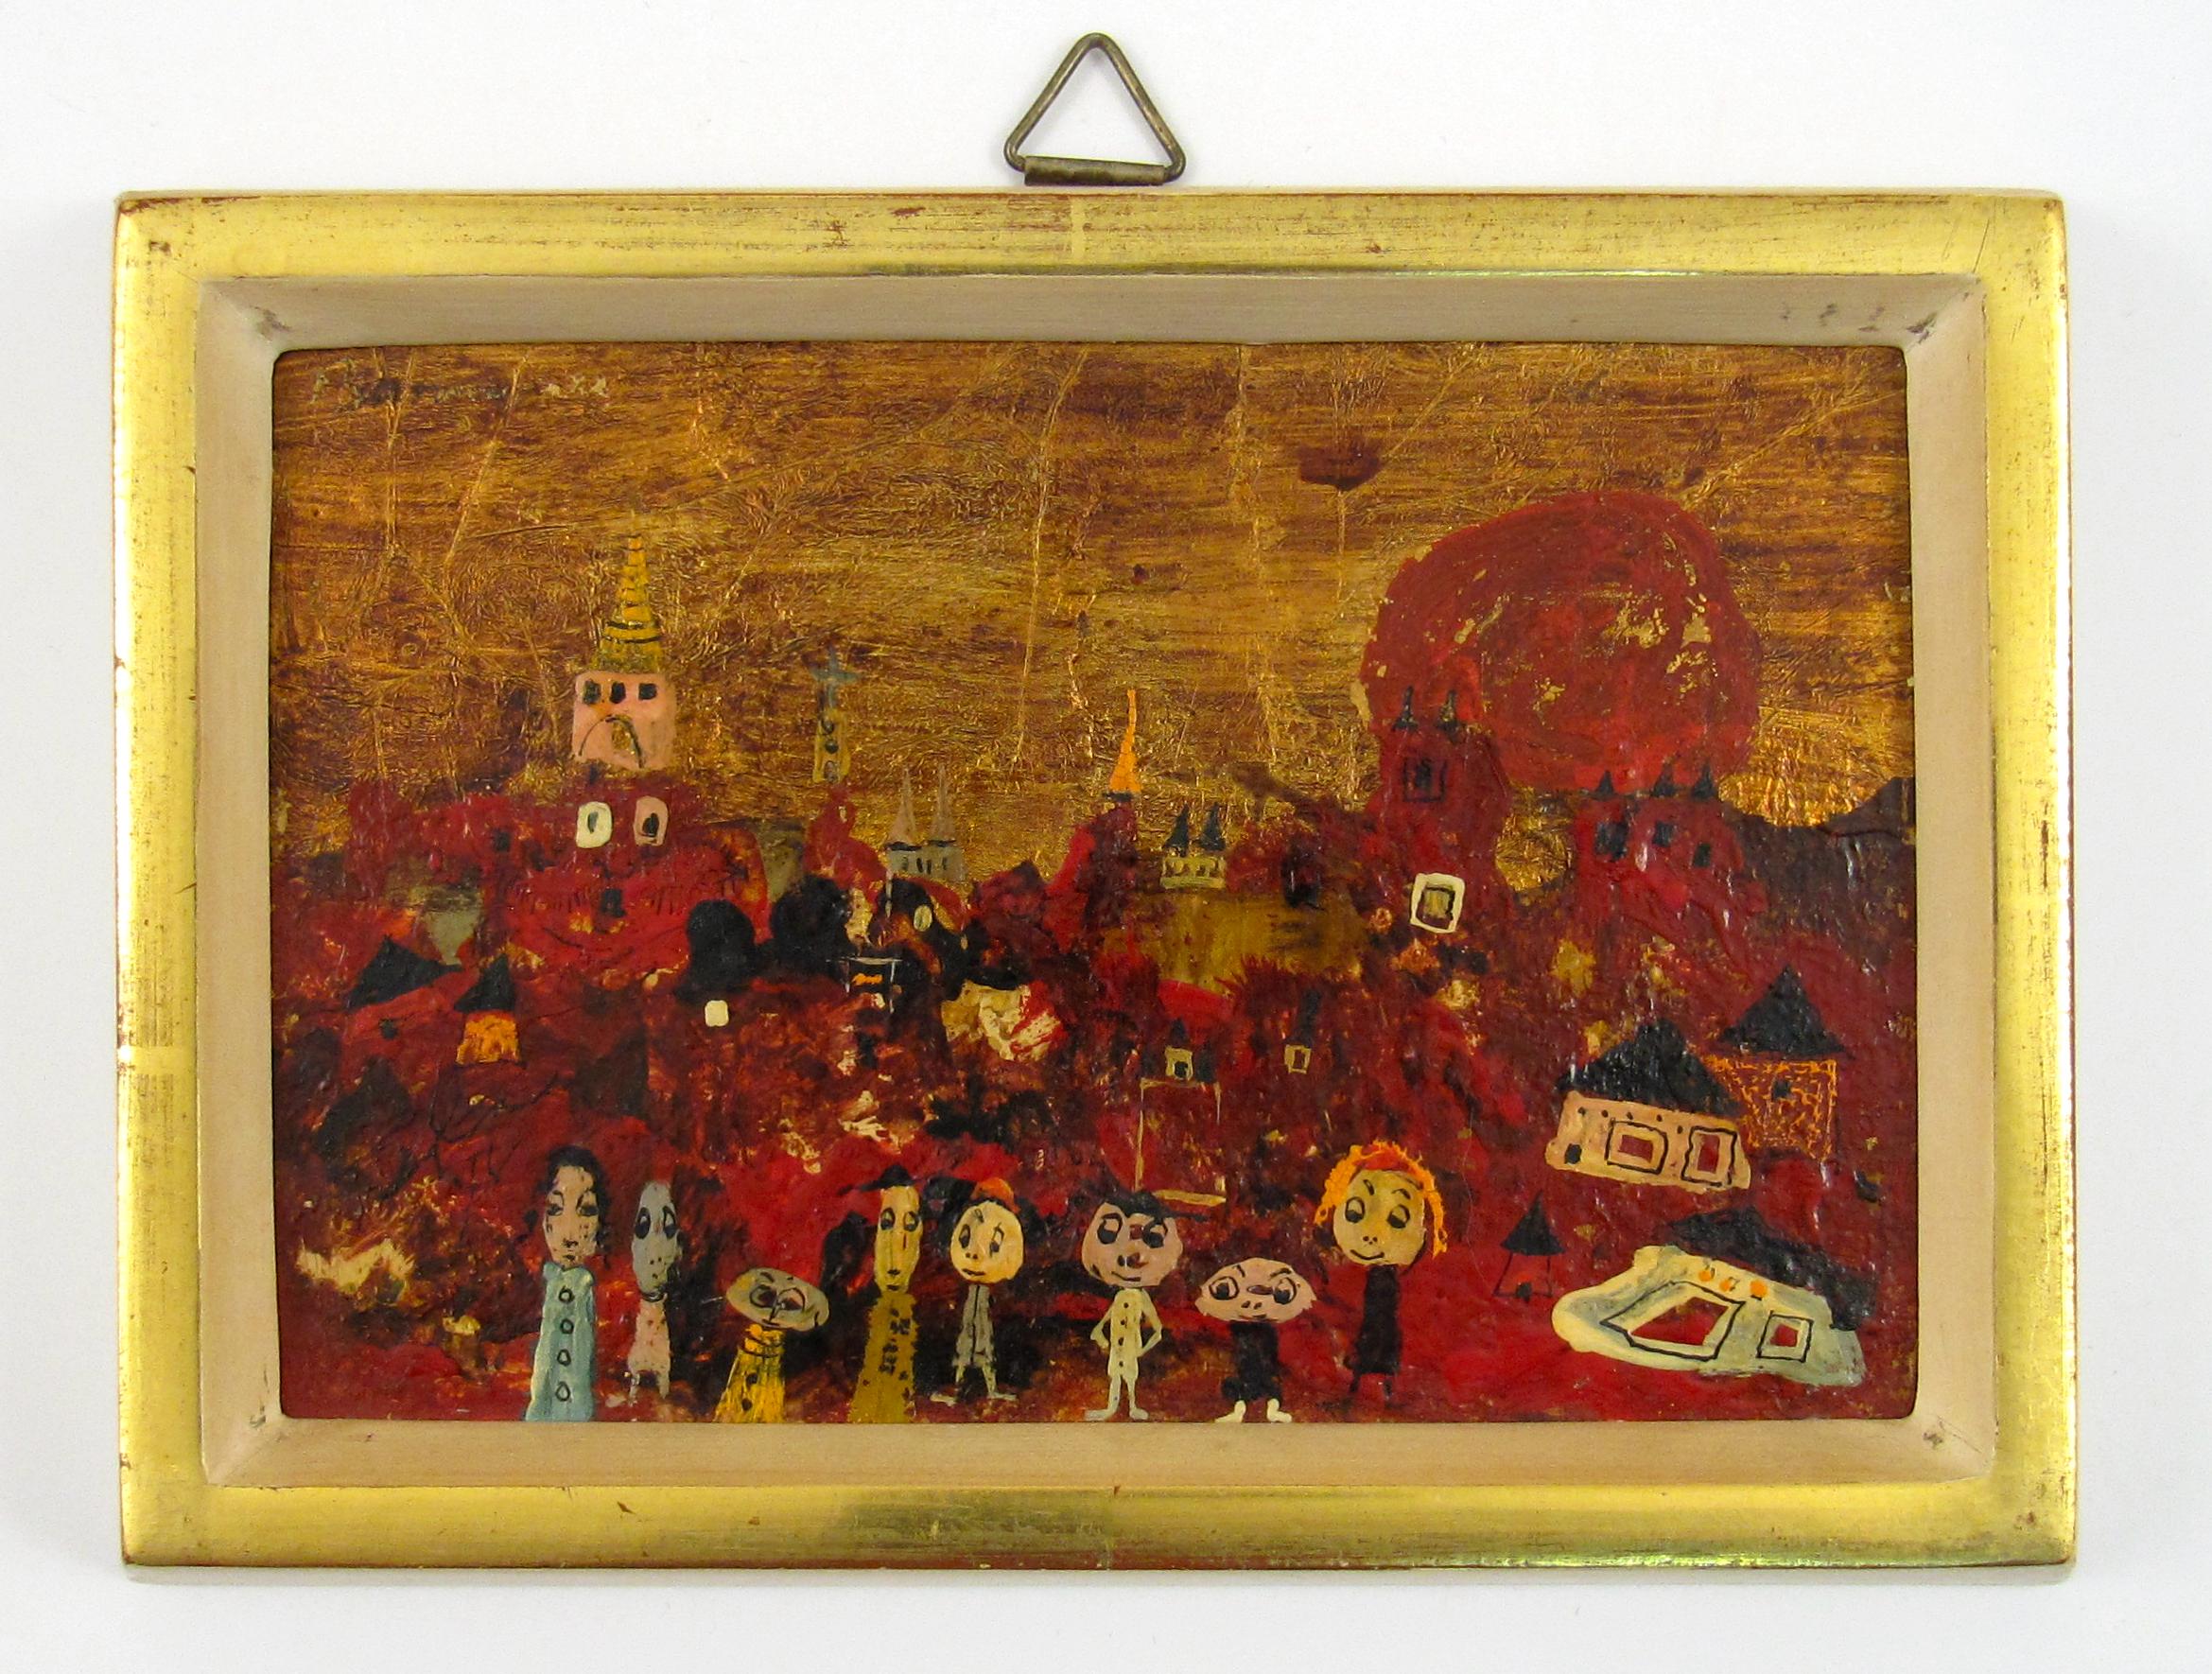 László Bornemisza
(Hungarian, 1910-1995)

Toscana – A Fairy Landscape

•	Mixed media: Oils & gold leaf on artist board, ca. 10.7 x 16 cm
•	Gold leaf frame, ca. 13 x 18 cm
•	Signed top left

Worldwide shipping is complimentary - There are no